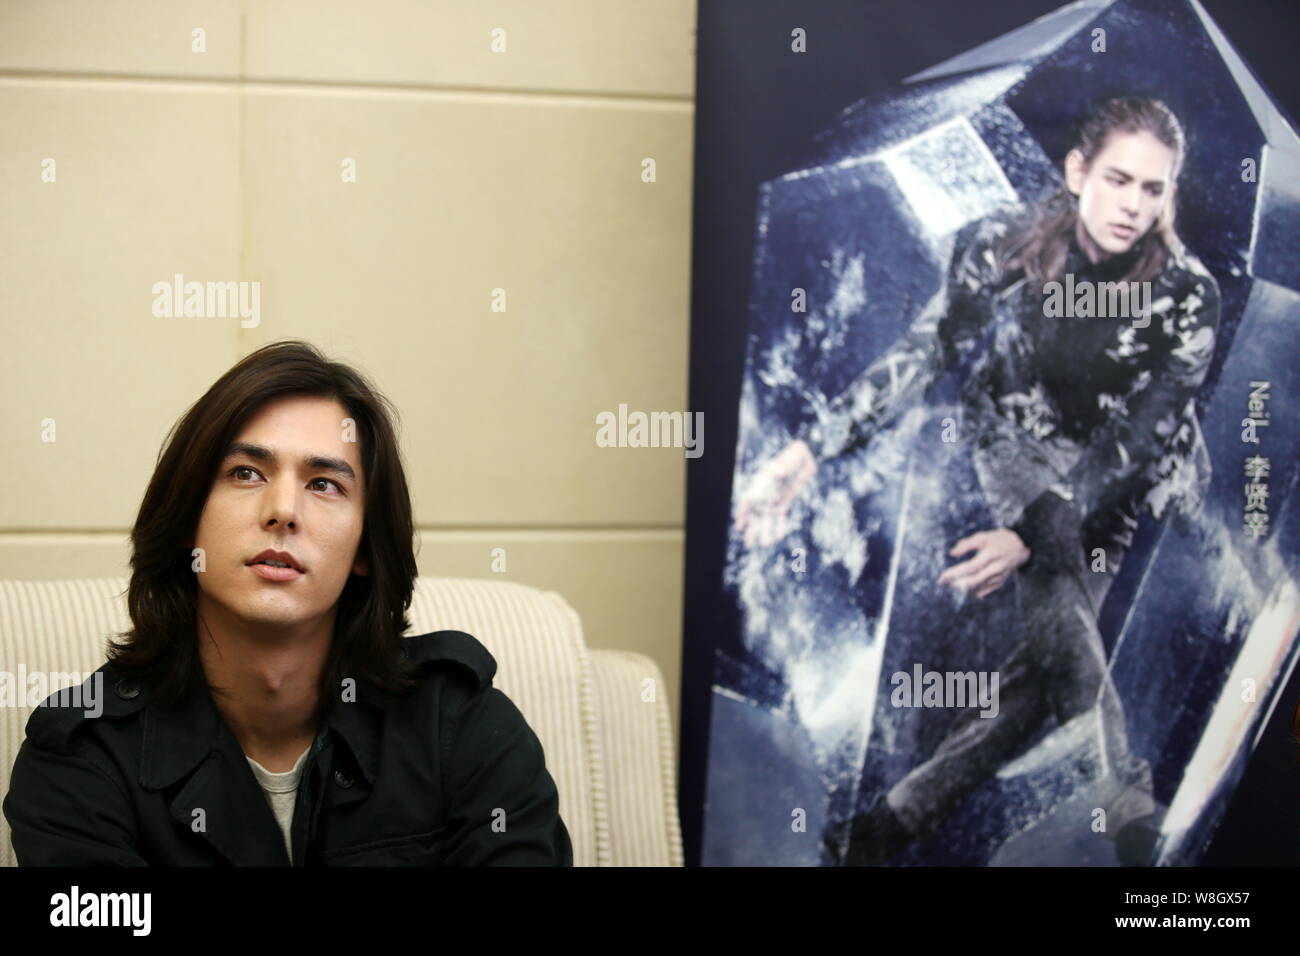 South Korean actor Lee Hyun-jae is interviewed during a promotional event  for his new movie 